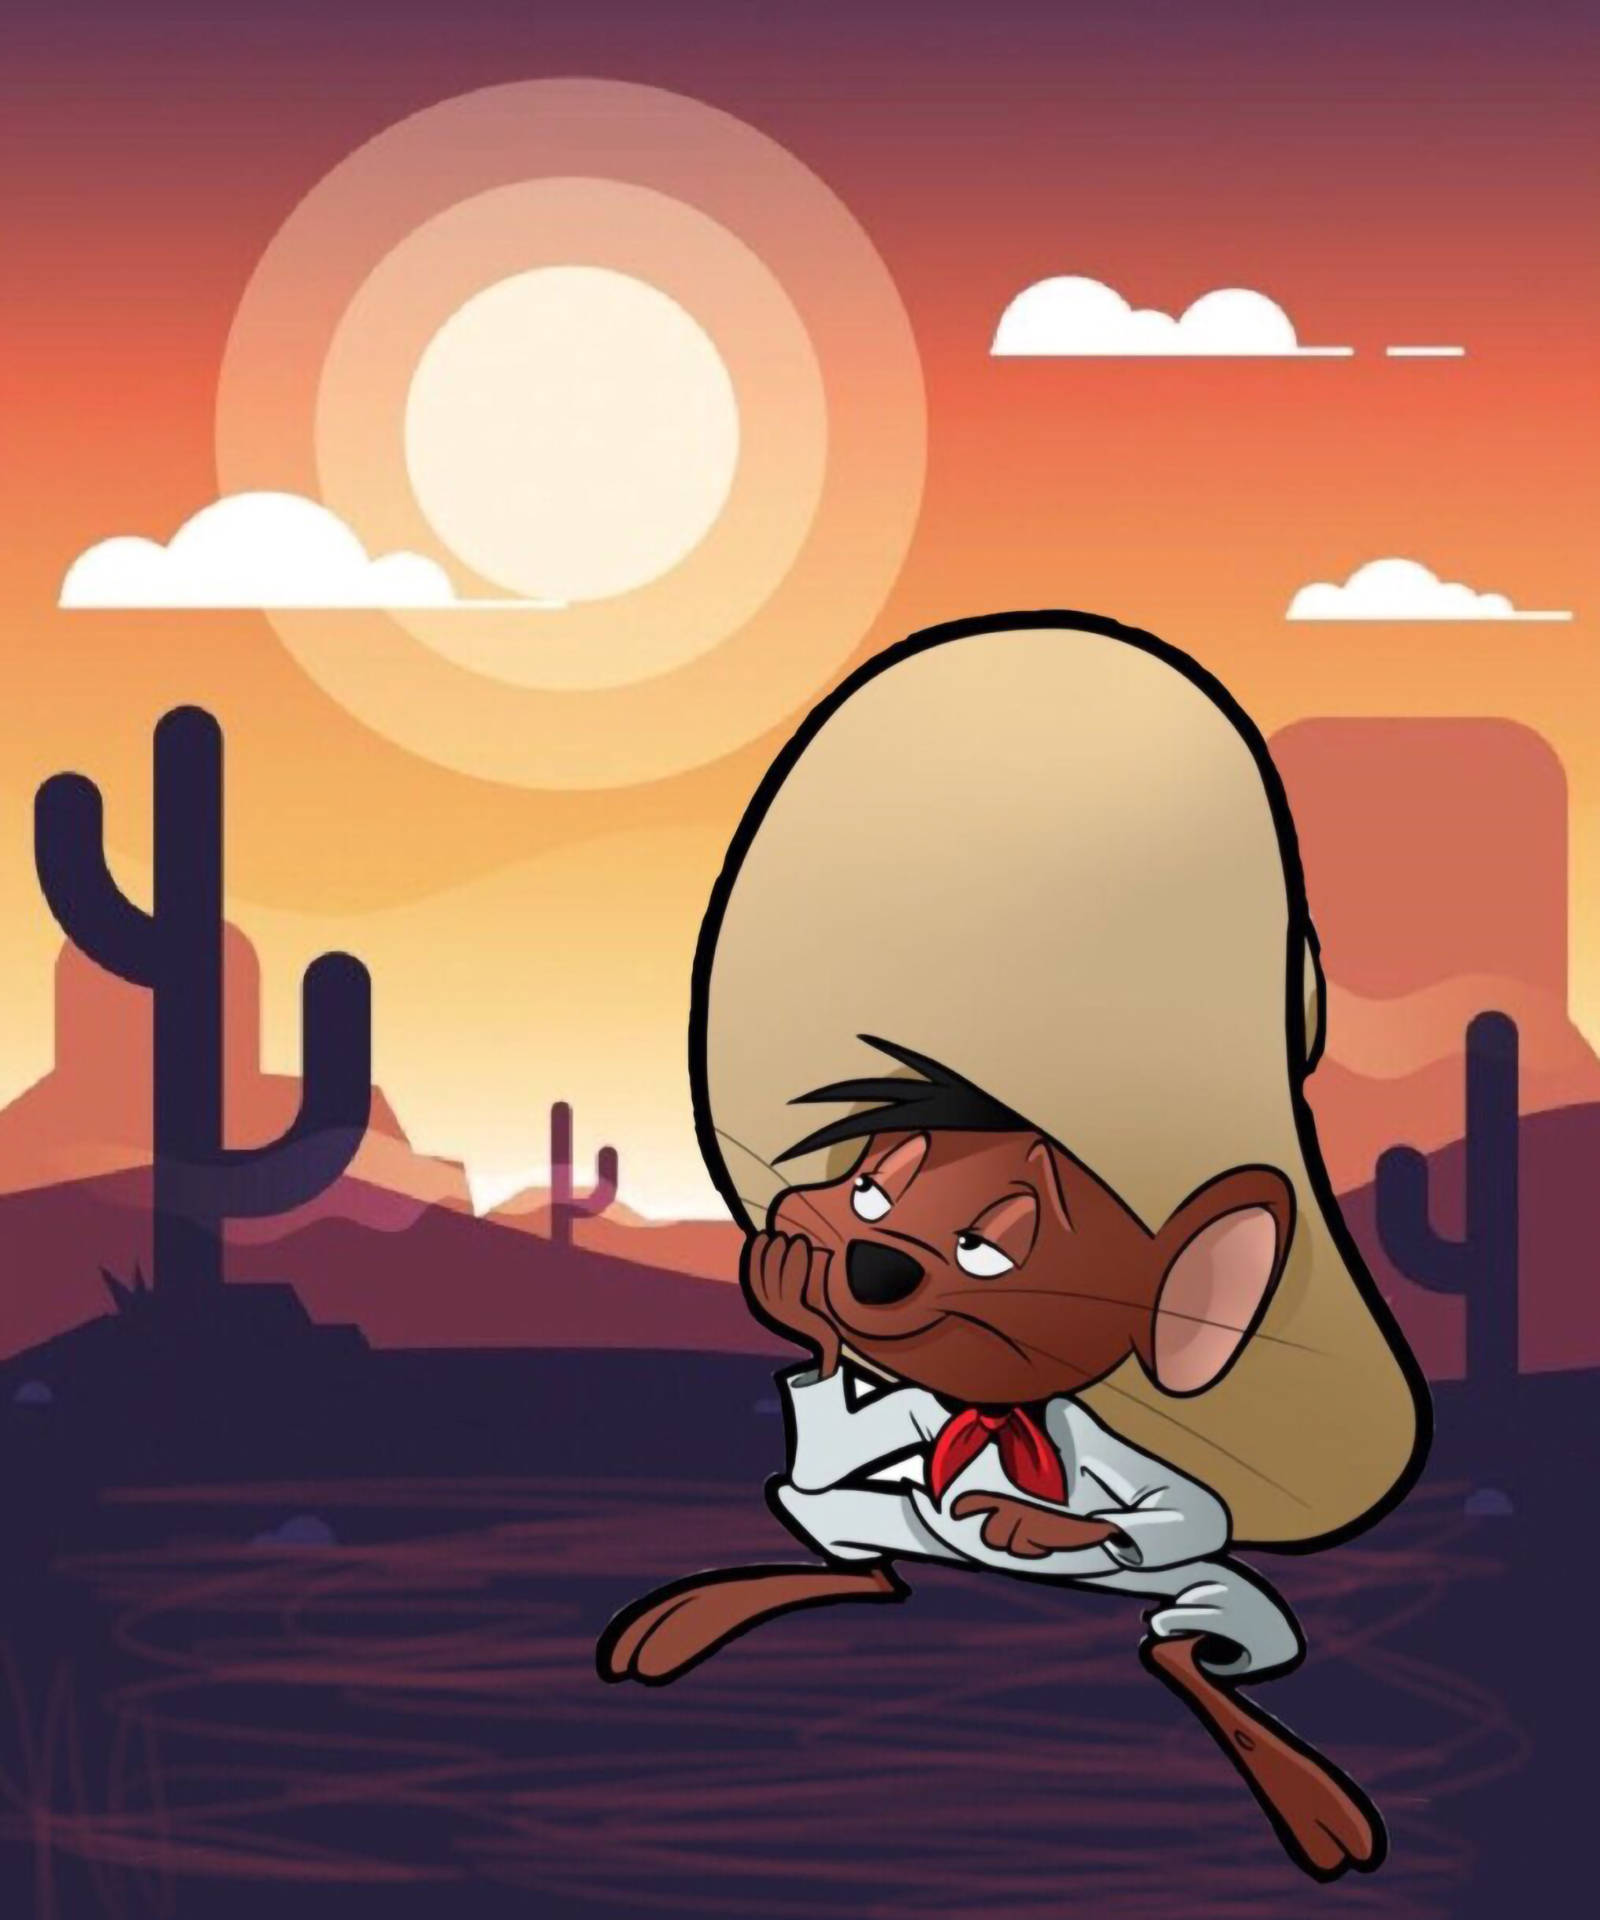 https://wallpapers.com/images/hd/speedy-gonzales-asian-squat-gi0iry8zn1h8vy8h.jpg